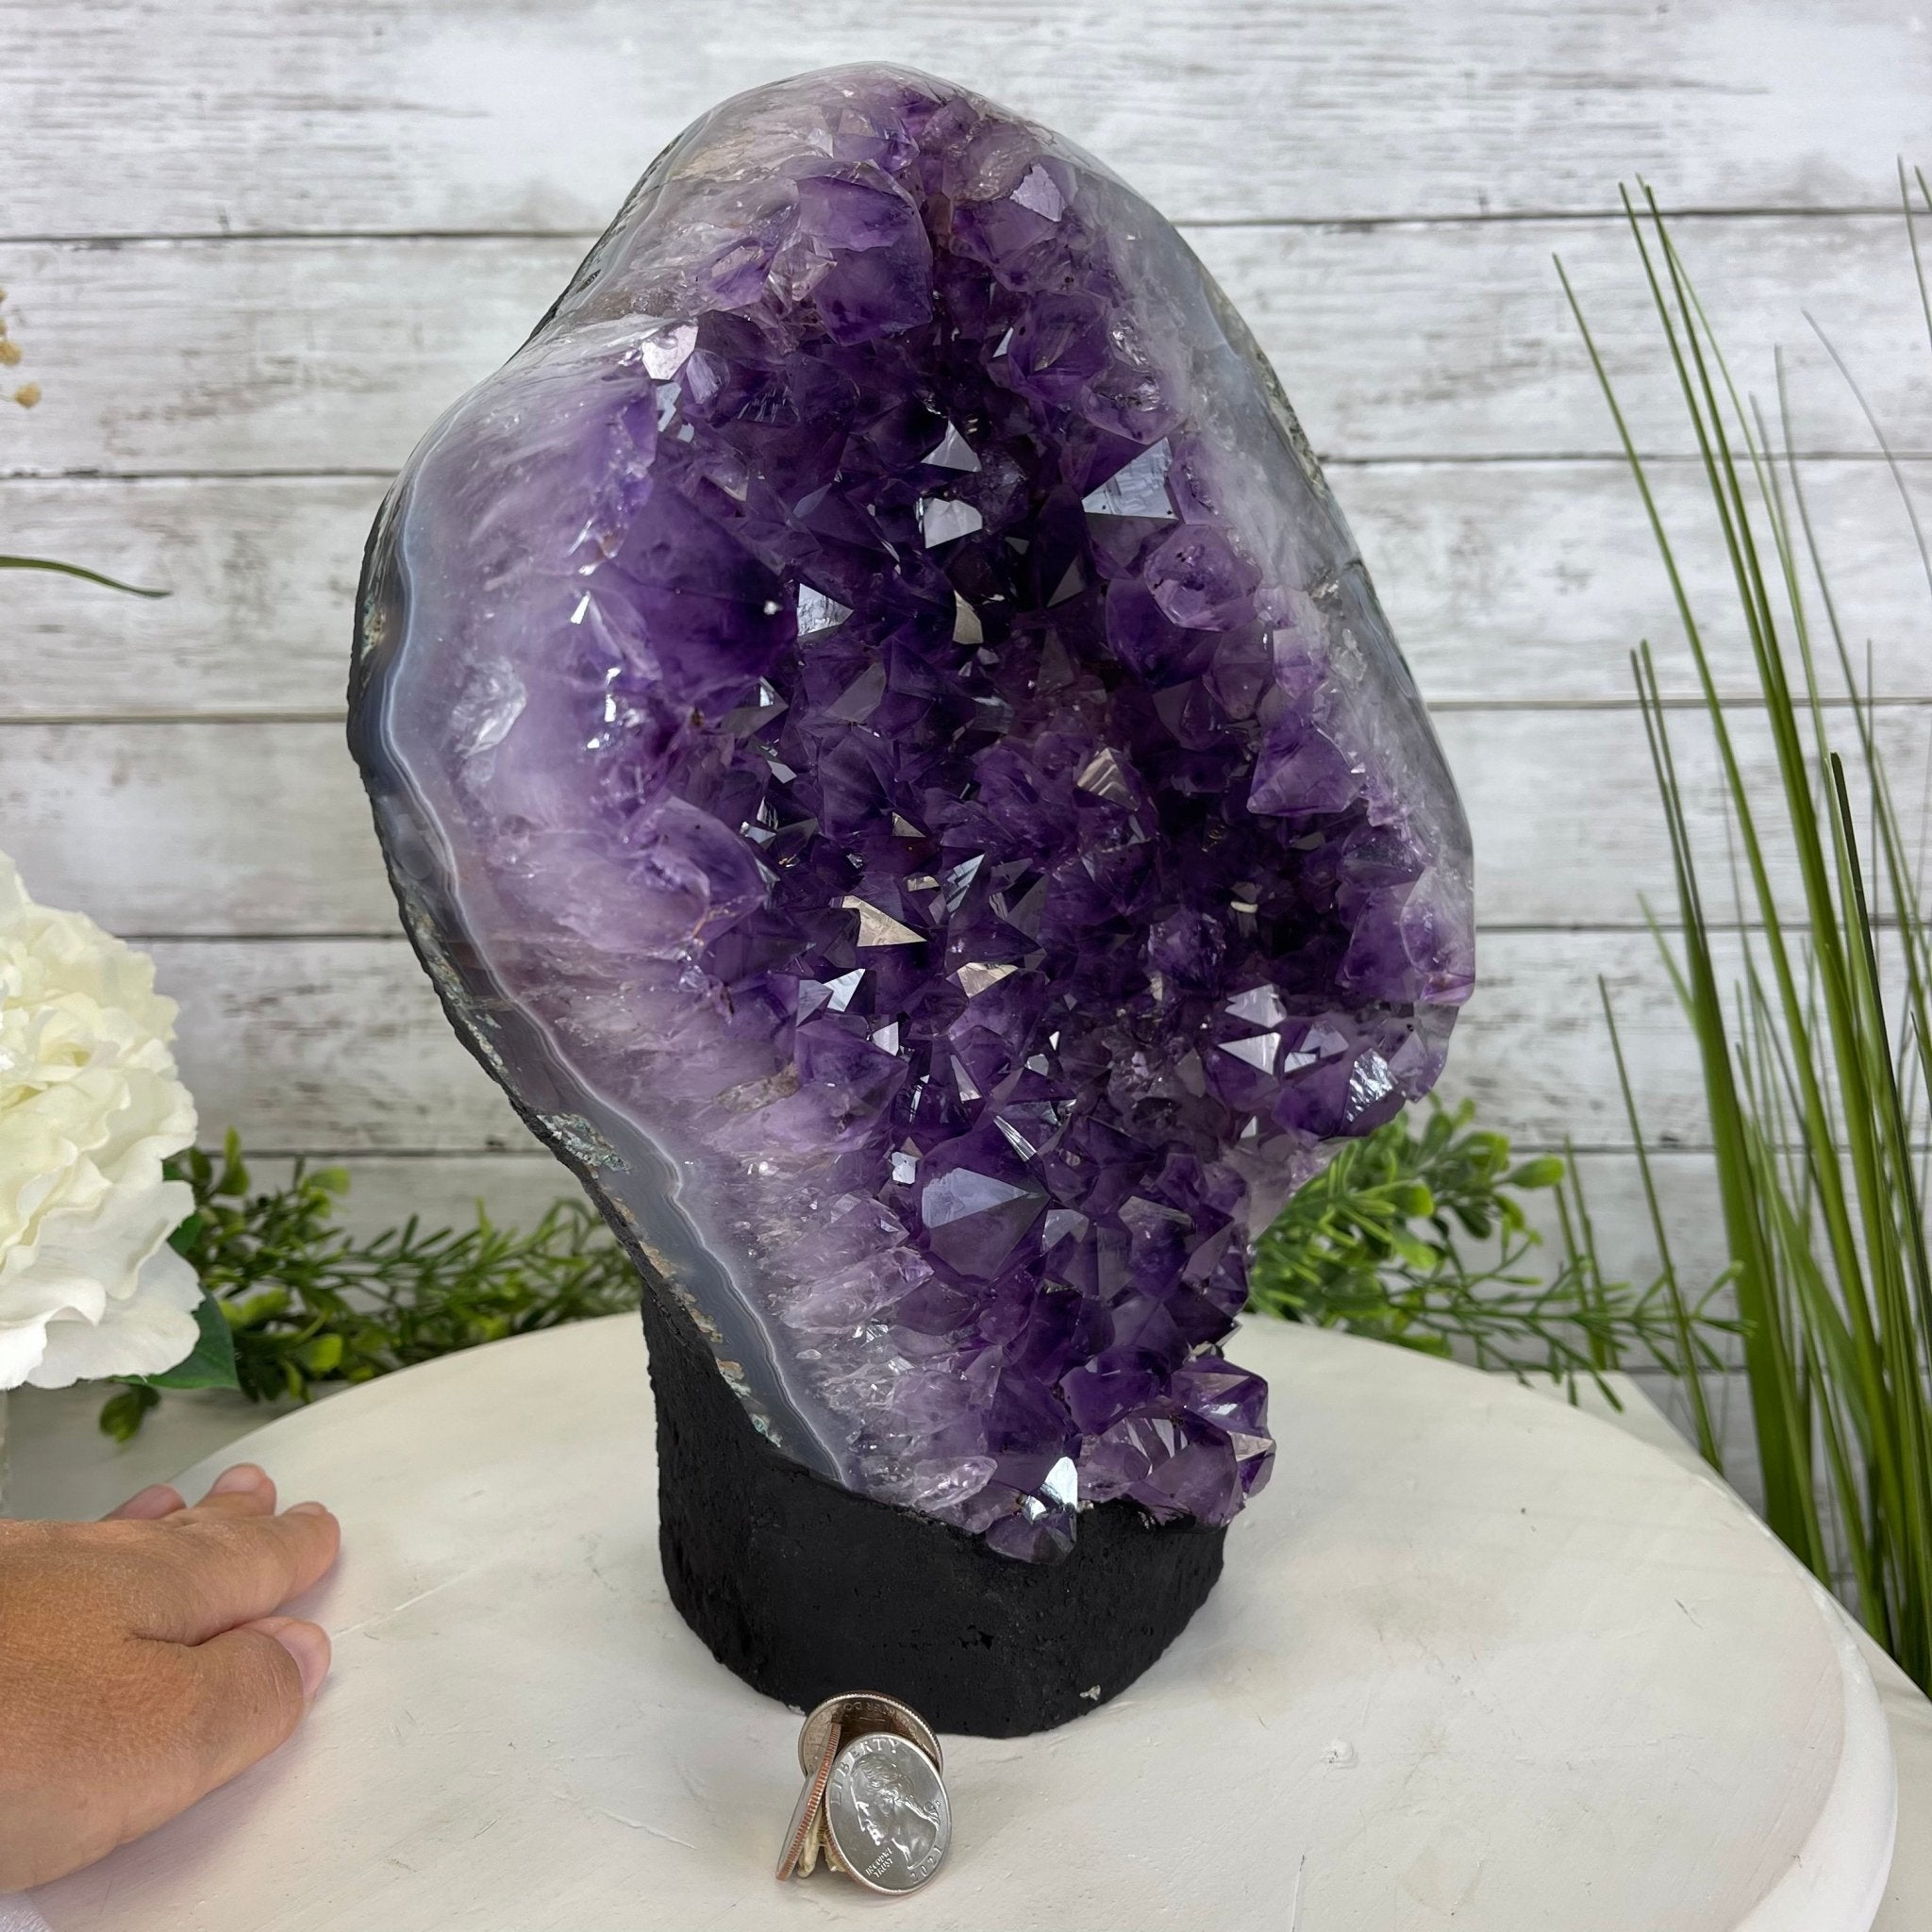 Extra Quality Amethyst Druse Cluster on Cement Base, 20.6 lbs and 12" Tall #5614-0071 - Brazil GemsBrazil GemsExtra Quality Amethyst Druse Cluster on Cement Base, 20.6 lbs and 12" Tall #5614-0071Clusters on Cement Bases5614-0071